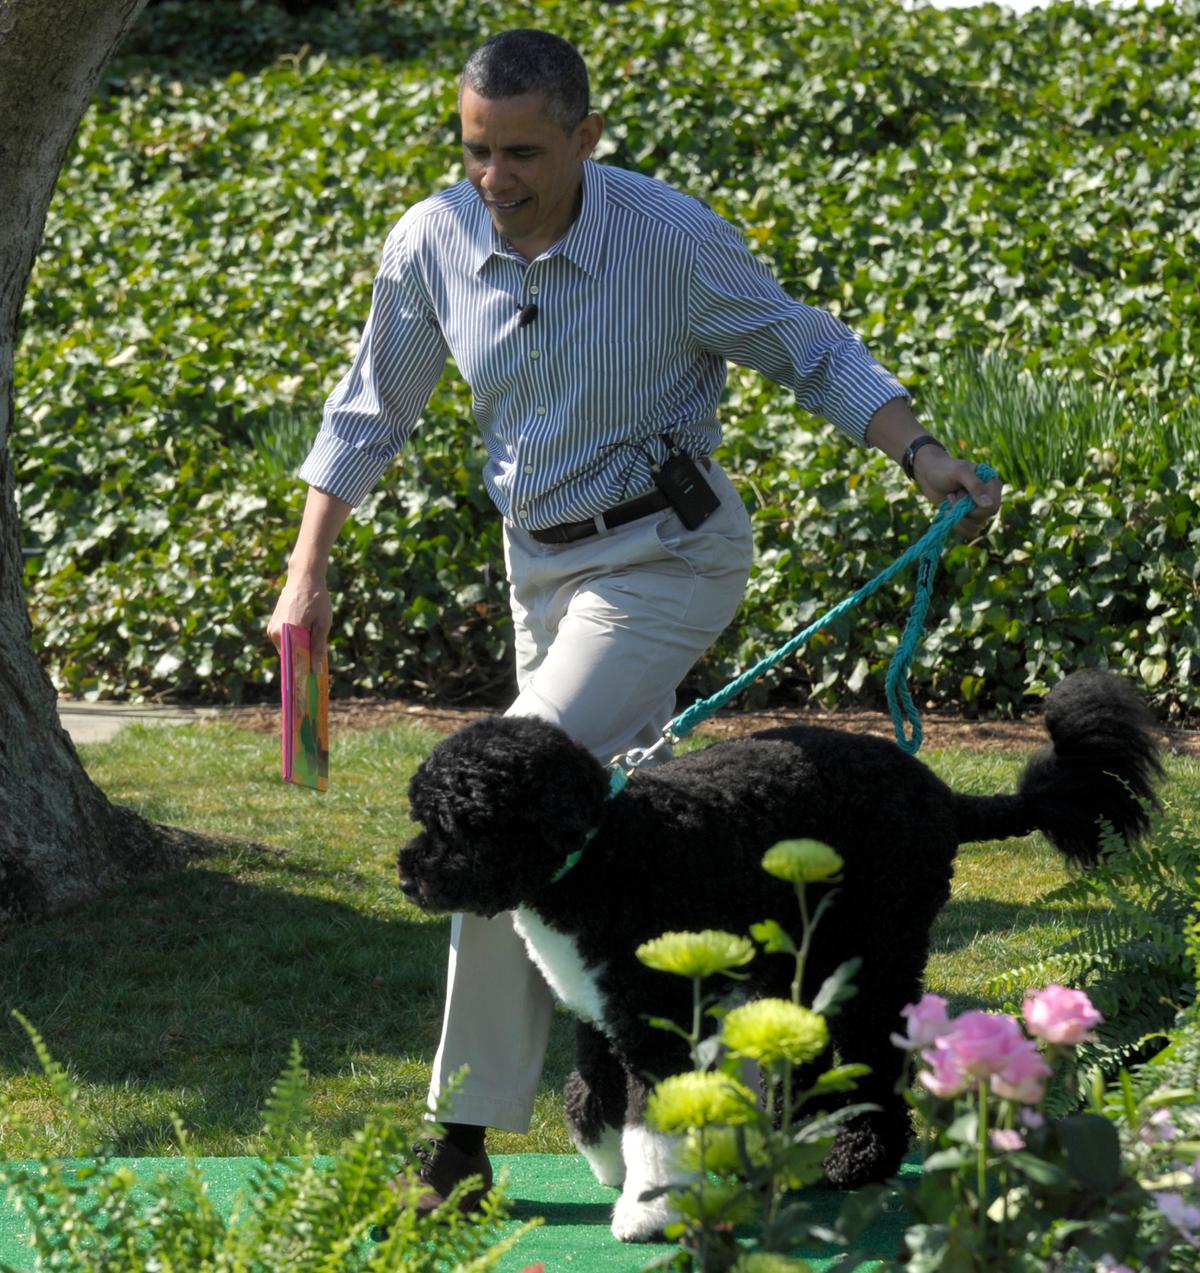 President Barack Obama arrives with his dog Bo, a Portuguese Water Dog, to read Chicka Chicka Boom Boom during activities at the annual Easter Egg Roll on the South Lawn of the White House in Washington, Monday, April 1, 2013. Bo was a present from Ted Kennedy. (AP Photo/Susan Walsh)